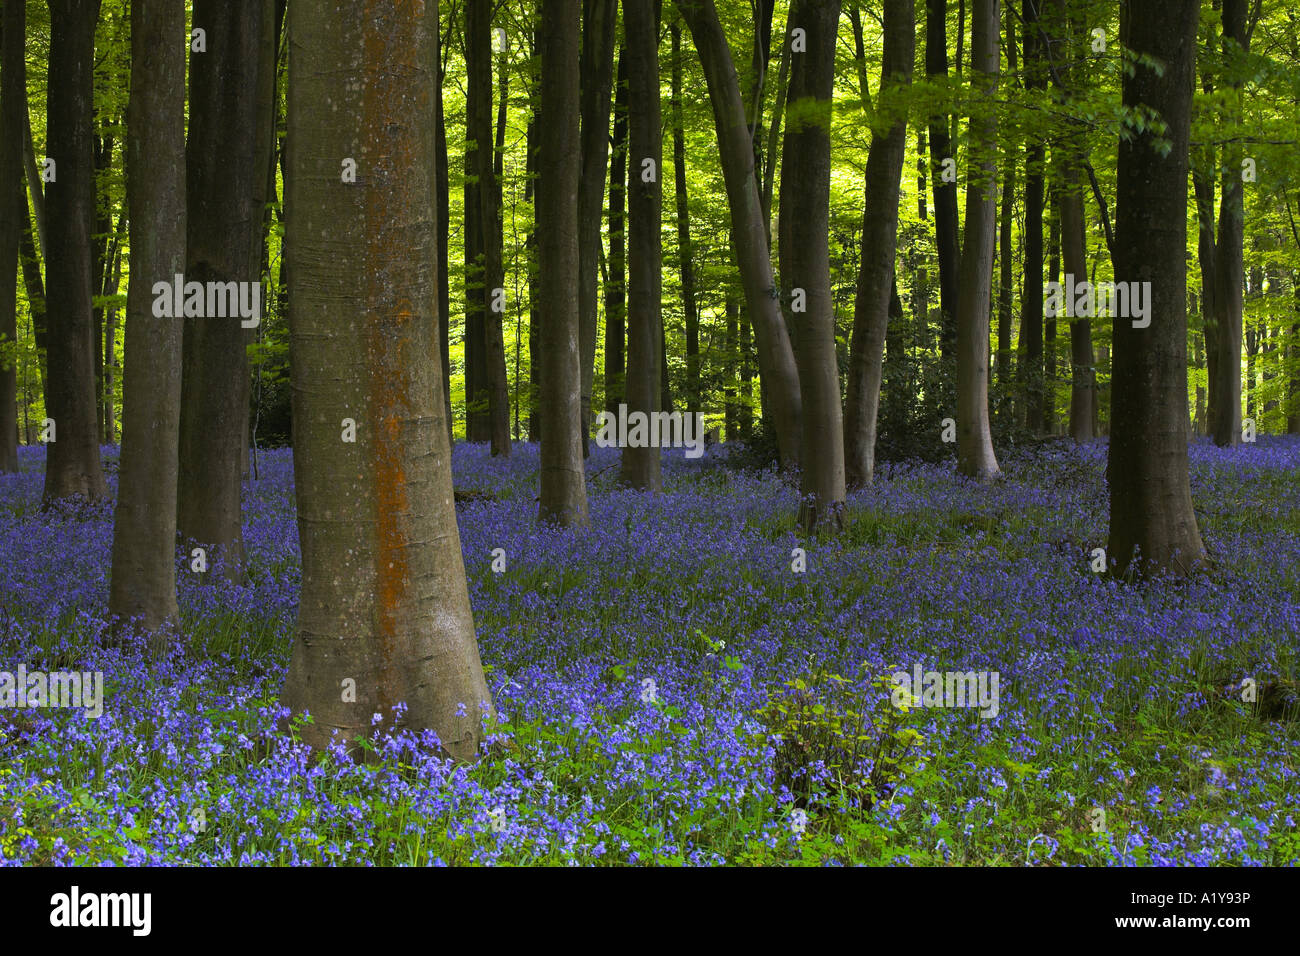 Bluebell woodland a Micheldever legno, Hampshire, Inghilterra Foto Stock